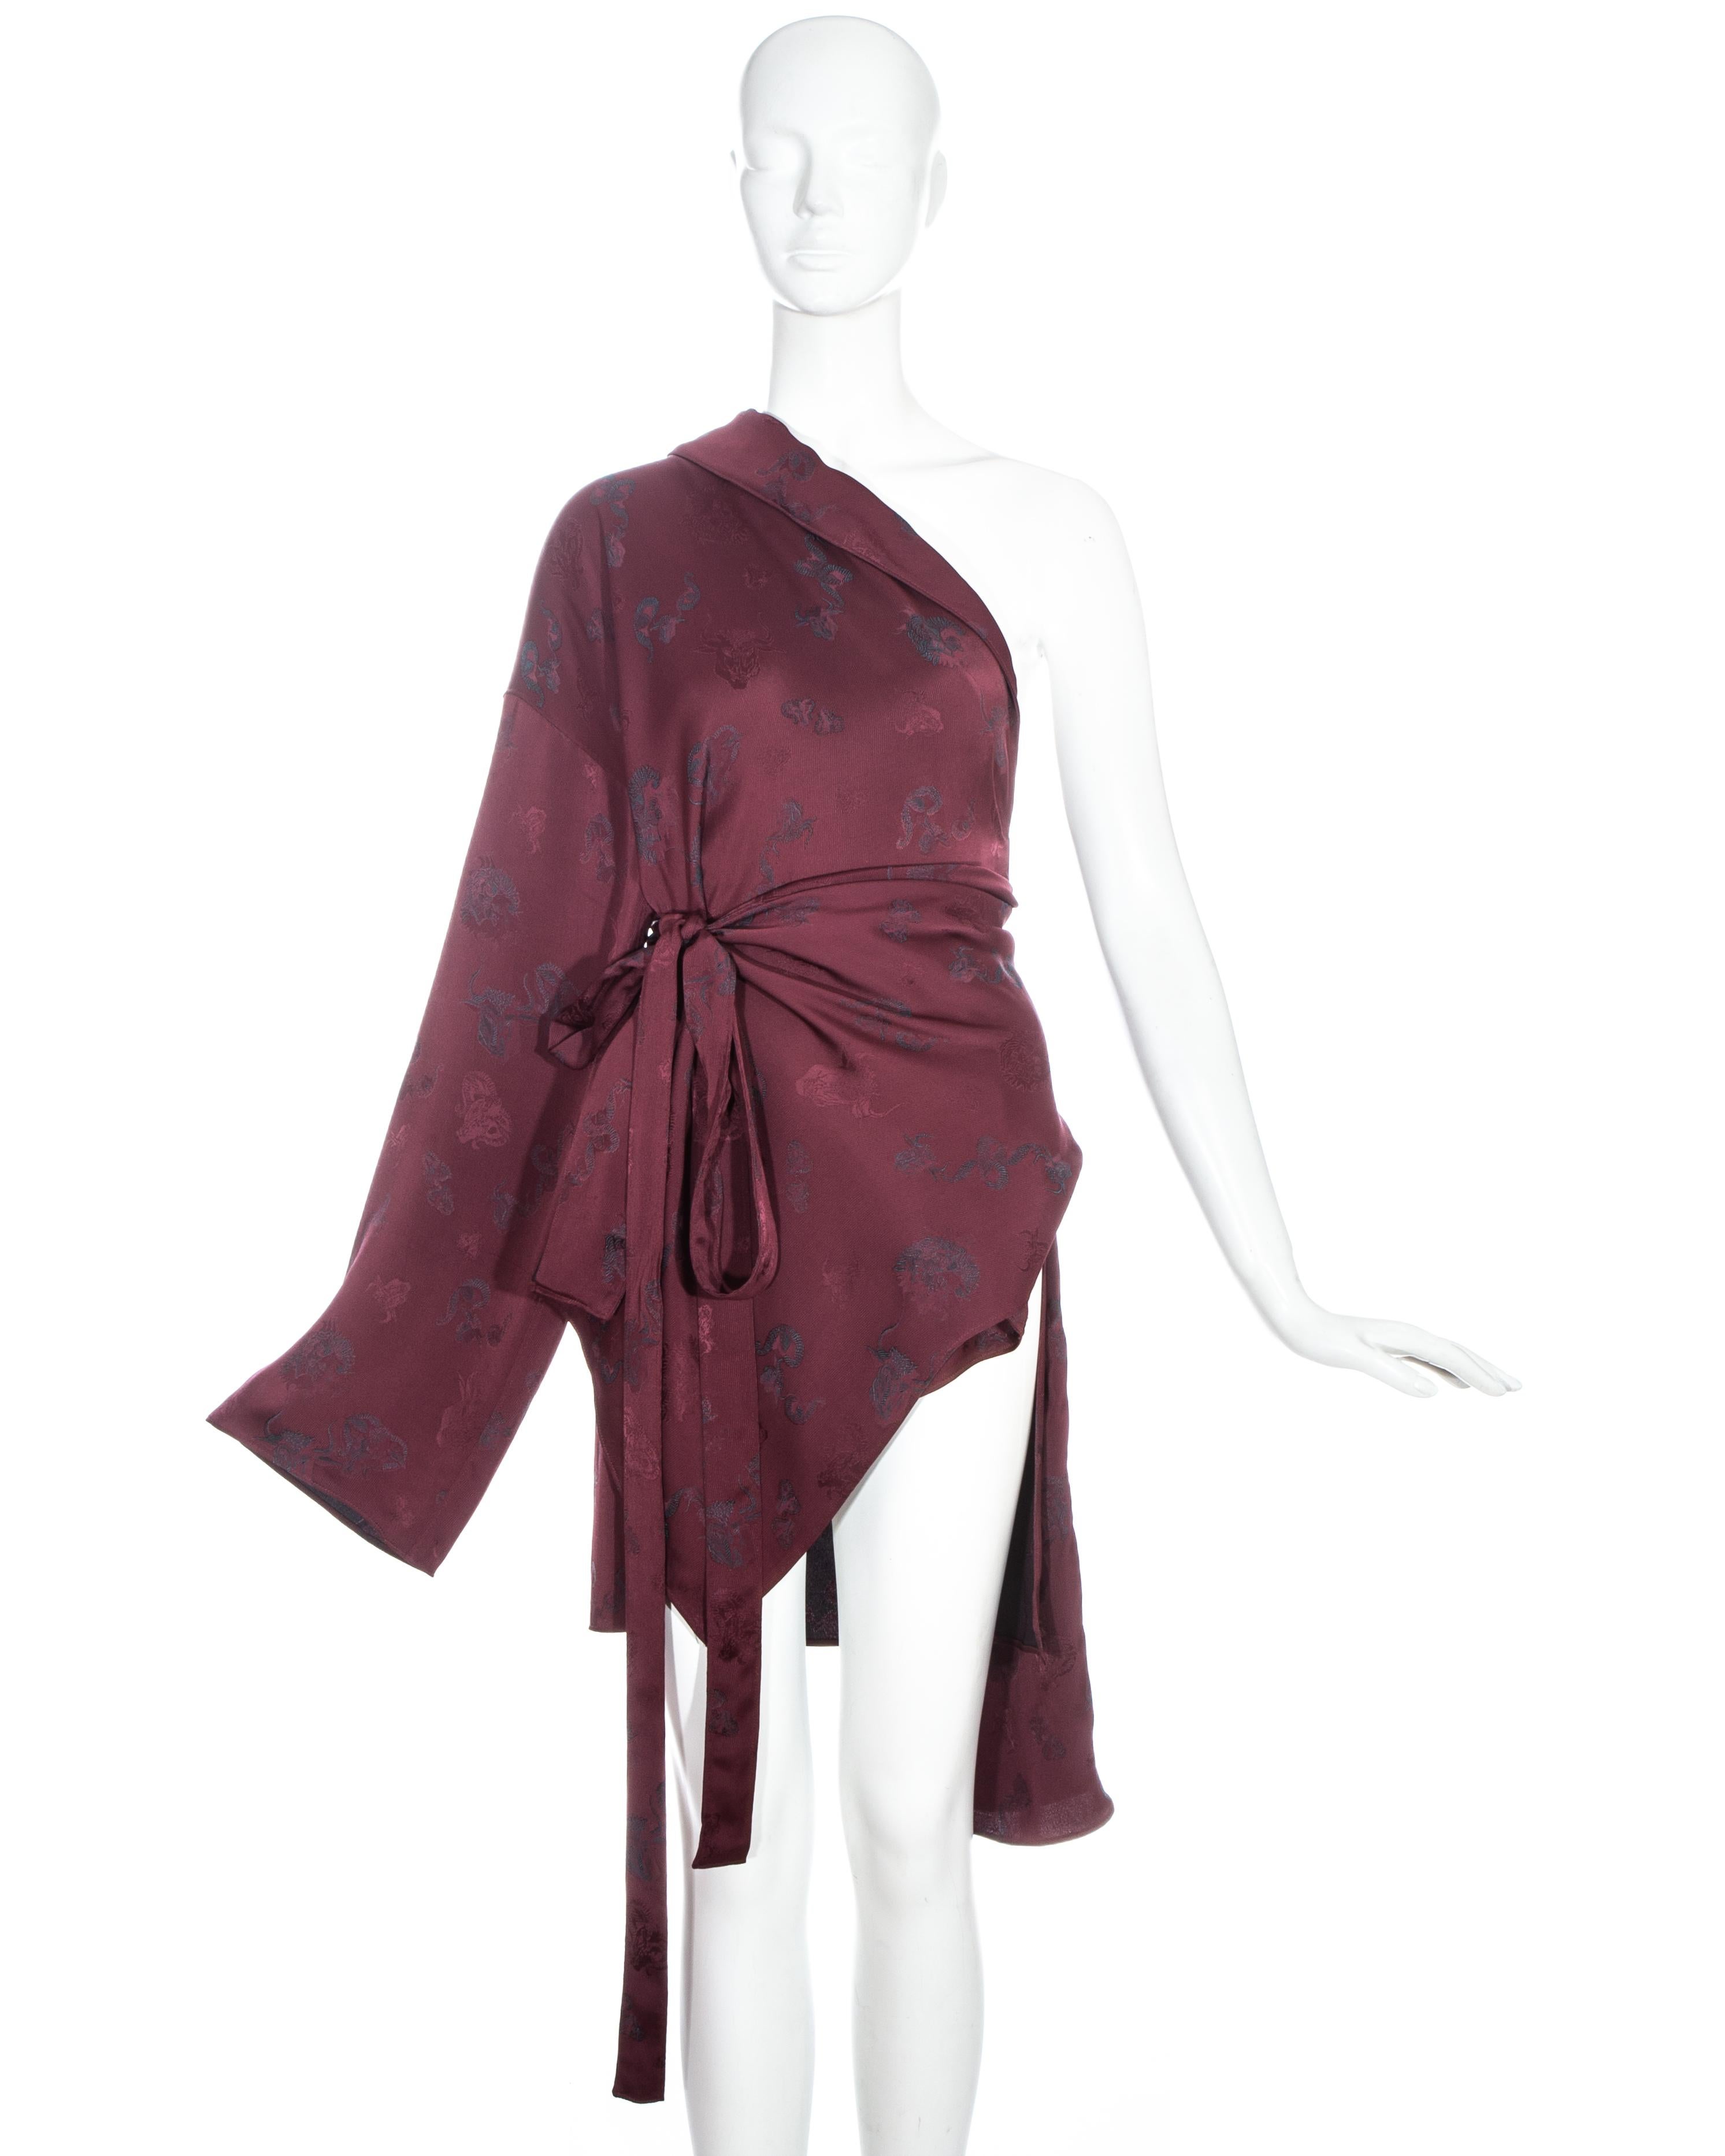 Jean Paul Gaultier burgundy rayon jacquard oversized kimono style wrap jacket - originally styled on the runway with one sleeve worn but can be worn in multiple ways.

Fall-Winter 1994